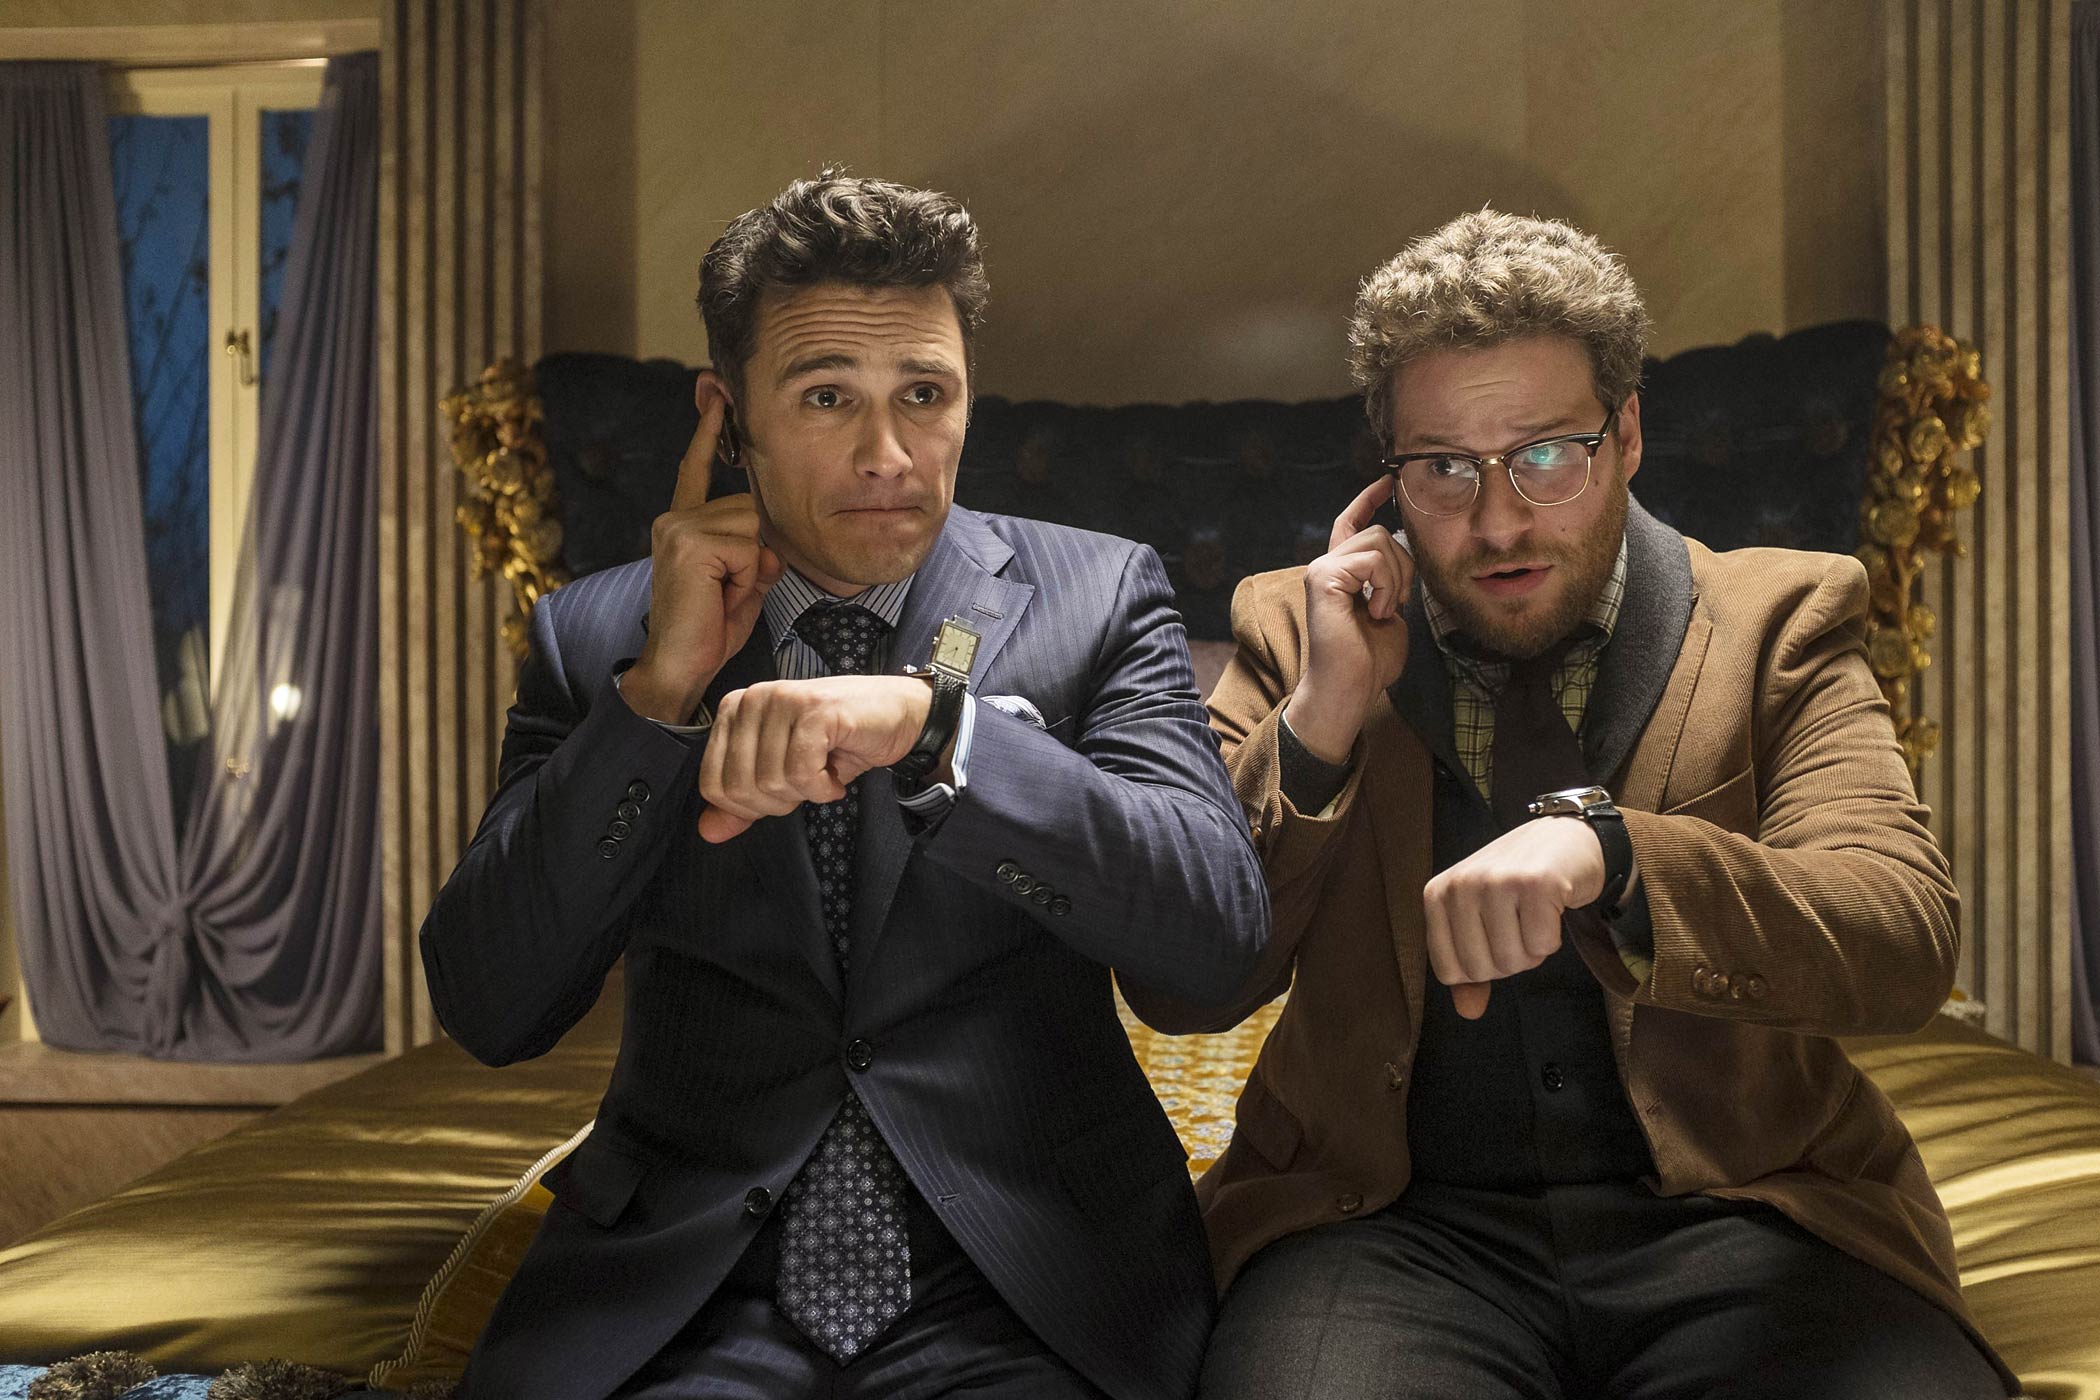 UK. James Franco and Seth Rogen in the ©Columbia Pictures new film: The Interview (2014)
Plot: Dave Skylark and his producer Aaron Rapoport run the popular celebrity tabloid TV show "Skylark Tonight." When they discover that North Korean dictator Kim Jong-un is a fan of the show, they land an interview with him in an attempt to legitimize themselves as journalists. As Dave and Aaron prepare to travel to Pyongyang, their plans change when the CIA recruits them, perhaps the two least-qualified men imaginable, to assassinate Kim Jong-un. 
Ref: LMK106-50085-141114
Supplied by LMKMEDIA. 
Editorial Only. Landmark Media is not the copyright owner of these Film or TV stills but provides a service only for recognised Media outlets. pictures@lmkmedia.com